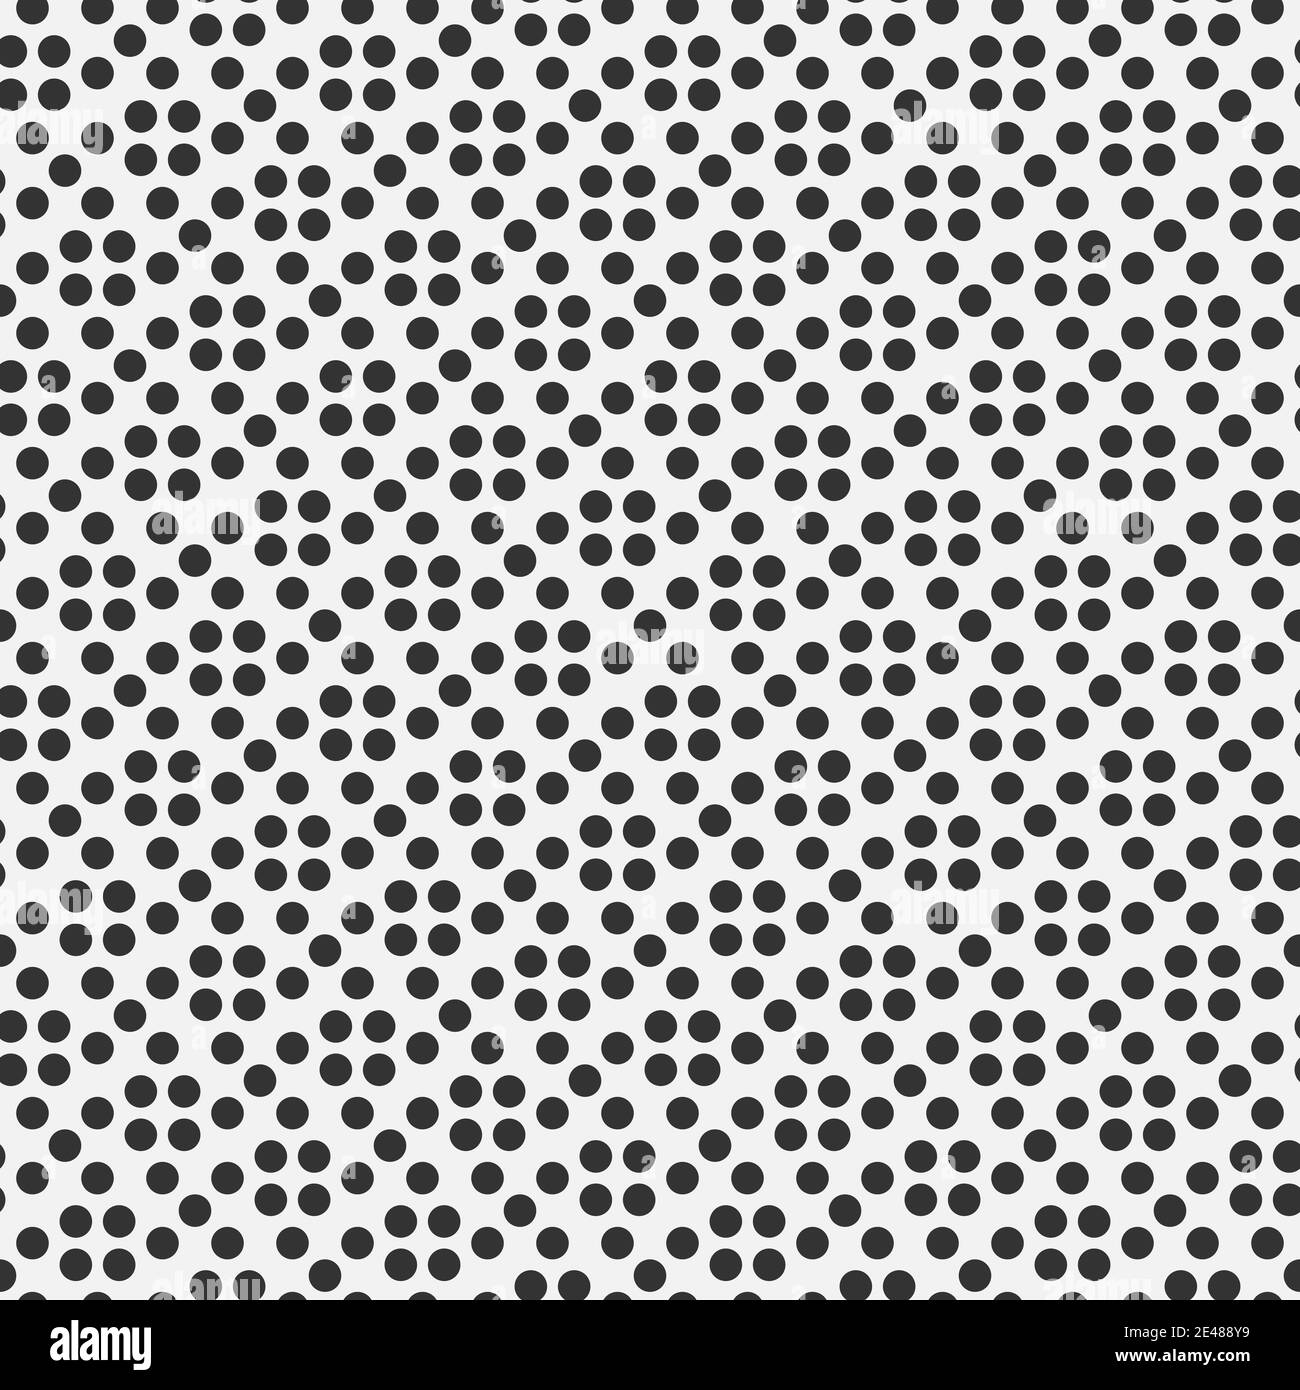 Seamless pattern with dots ordered grid vector illustration Stock Vector